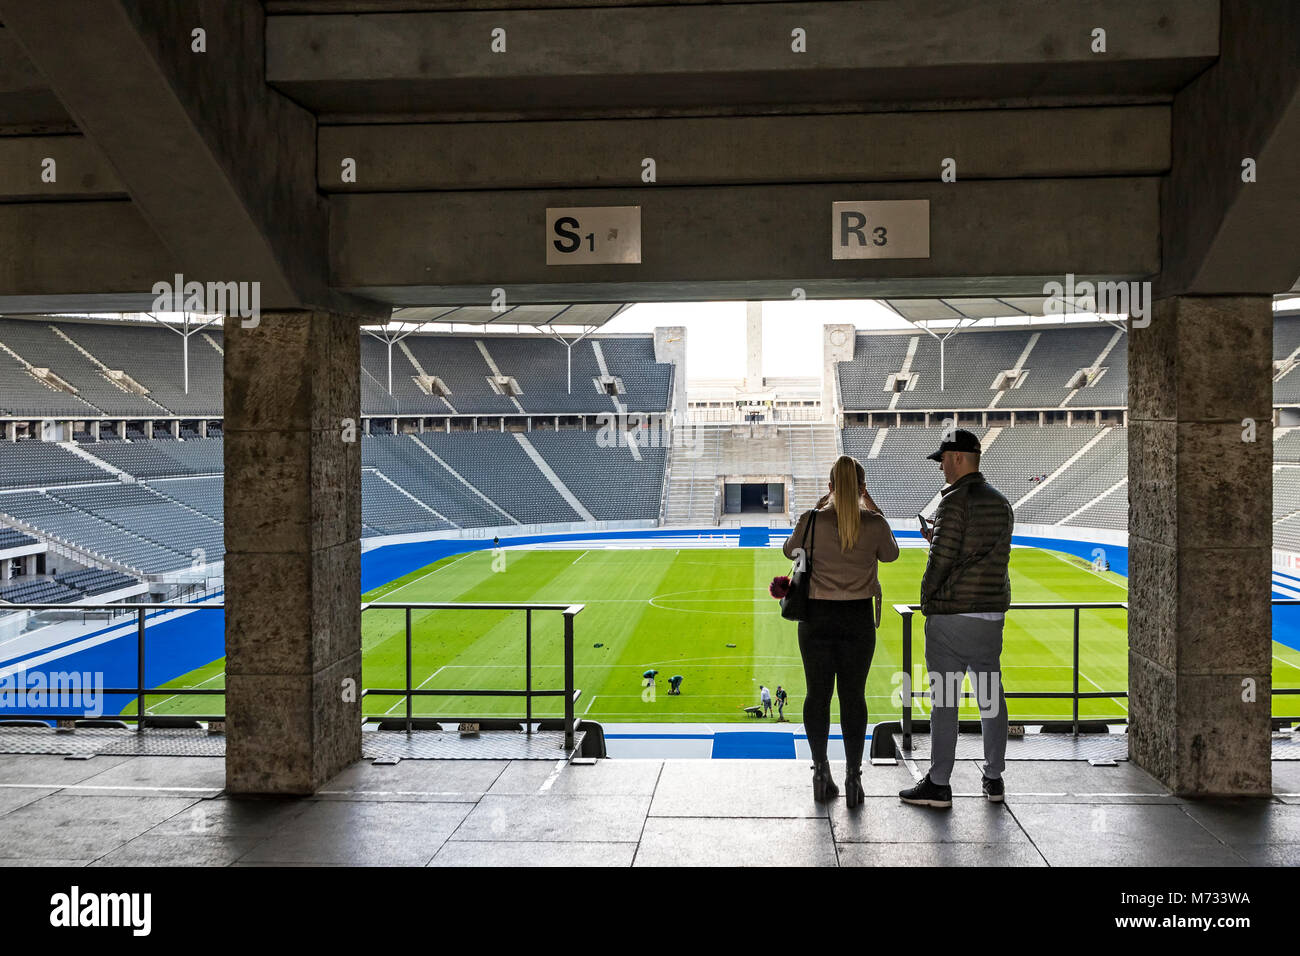 Couple of people take a picture of tribunes of Olympiastadion (Olympic Stadium) in Berlin, Germany Stock Photo